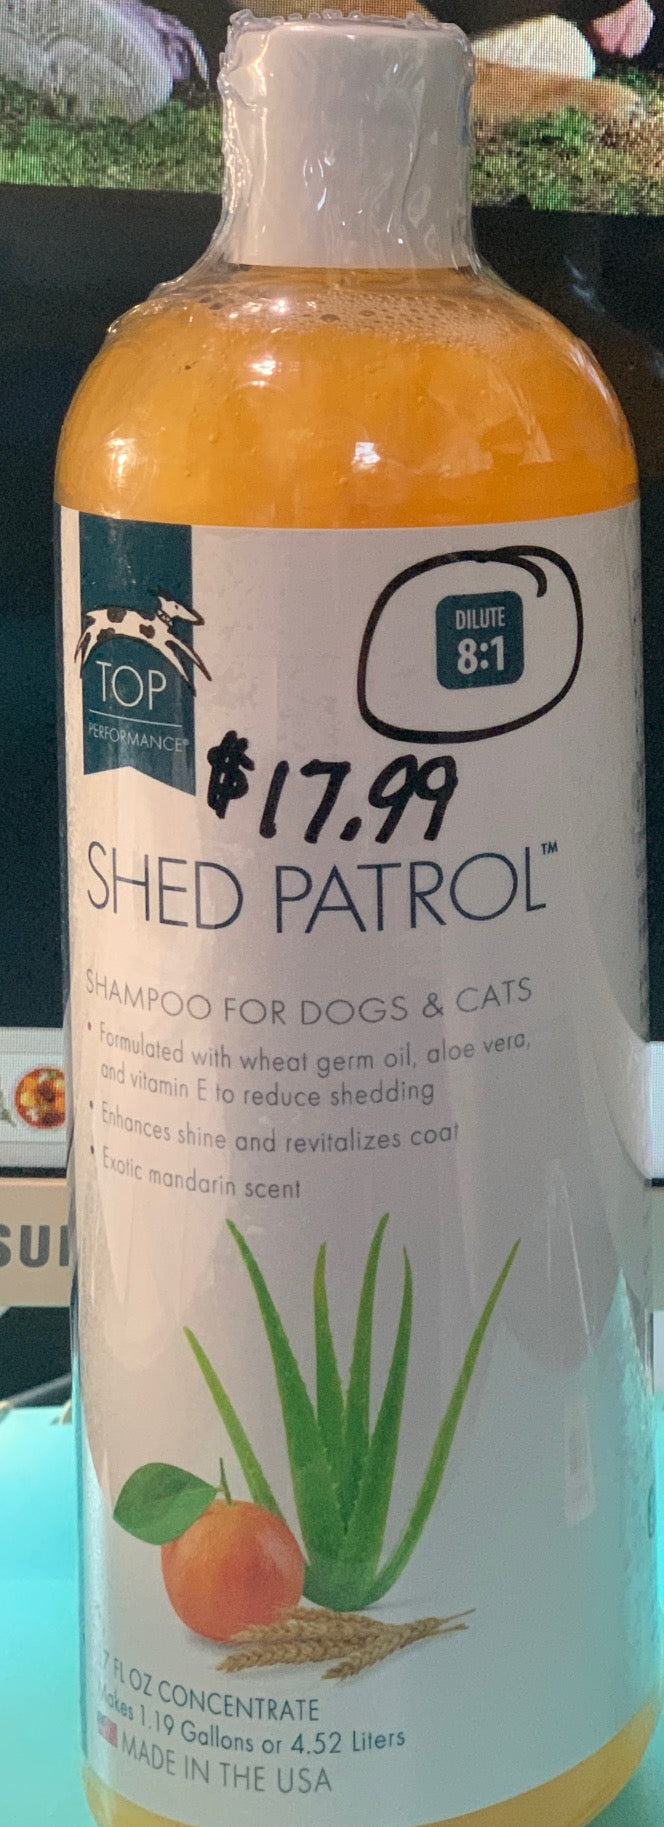 Shampoo Shed Patrol For Dogs & Cats 17 oz concentrate 8:1